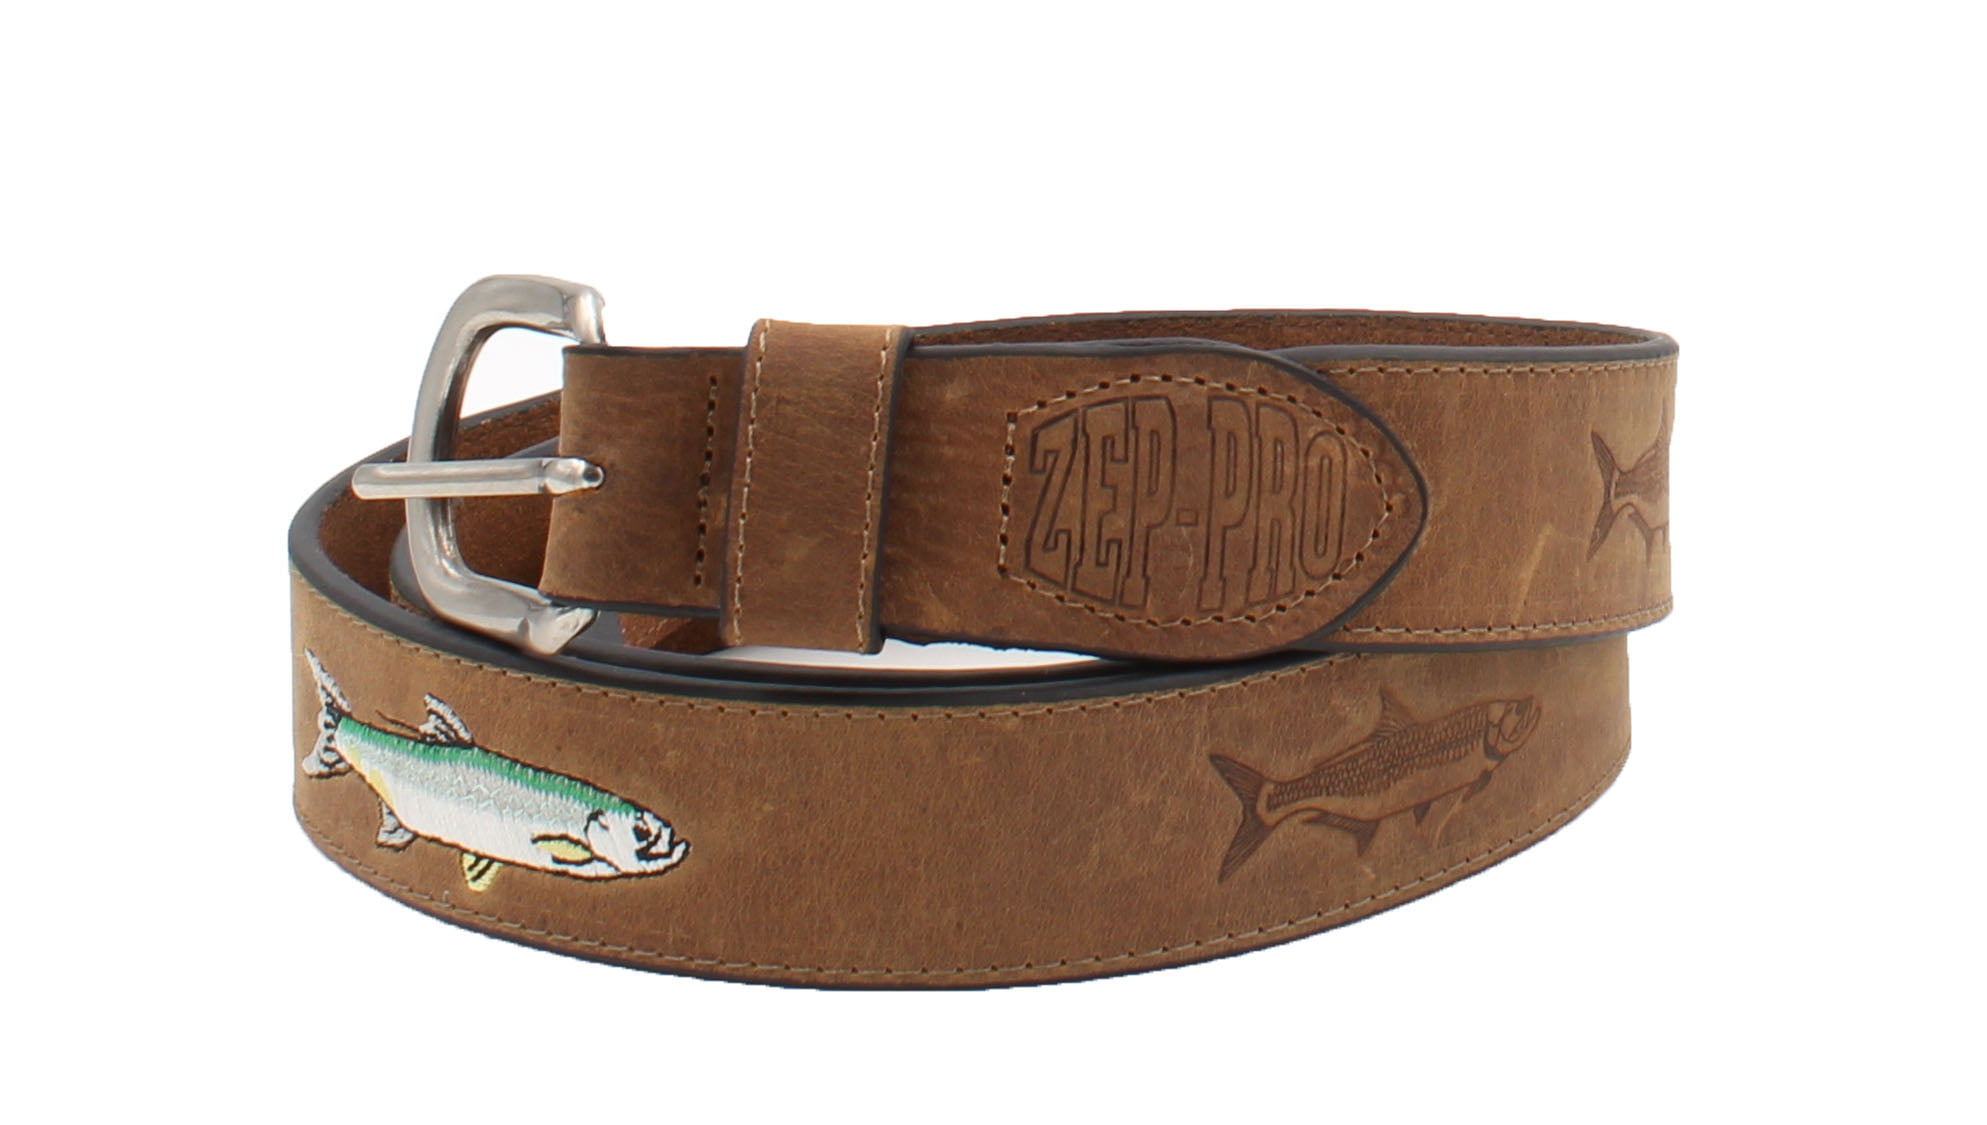 ZEP PRO Mens Silver Buckle Embossed Leather and Embroidered Tarpon Belt ...